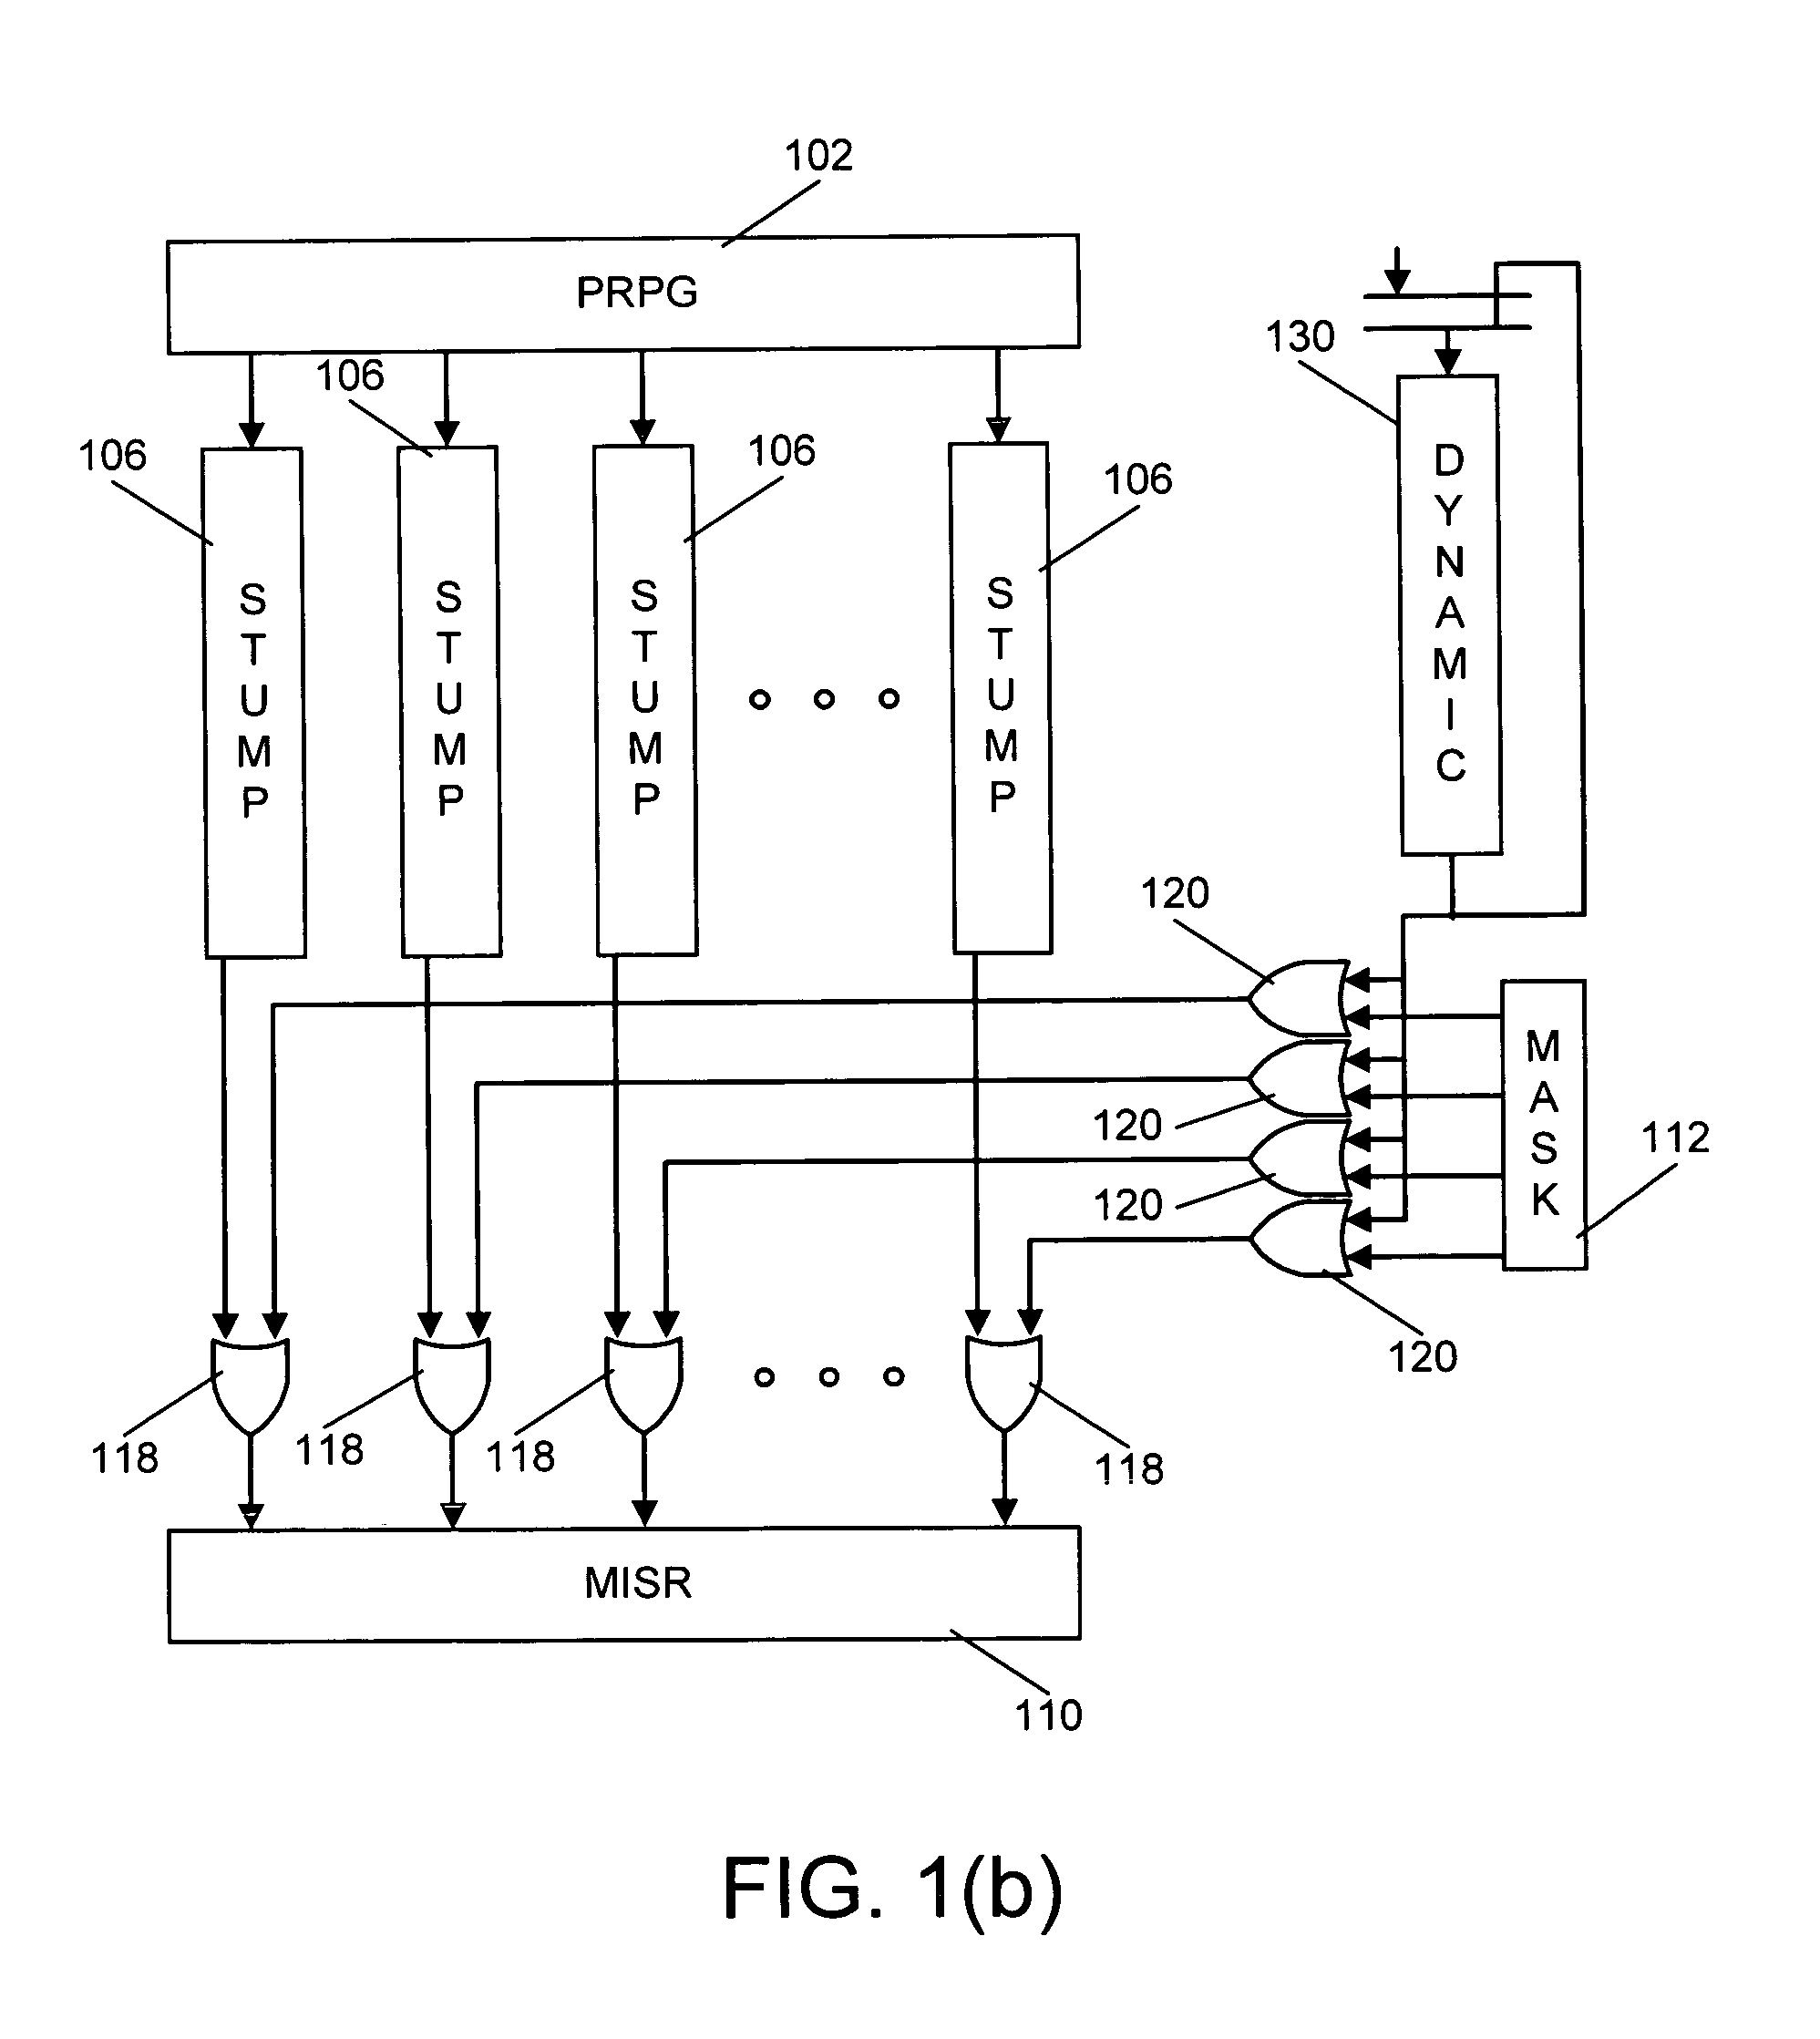 Method of improving logical built-in self test (LBIST) AC fault isolations